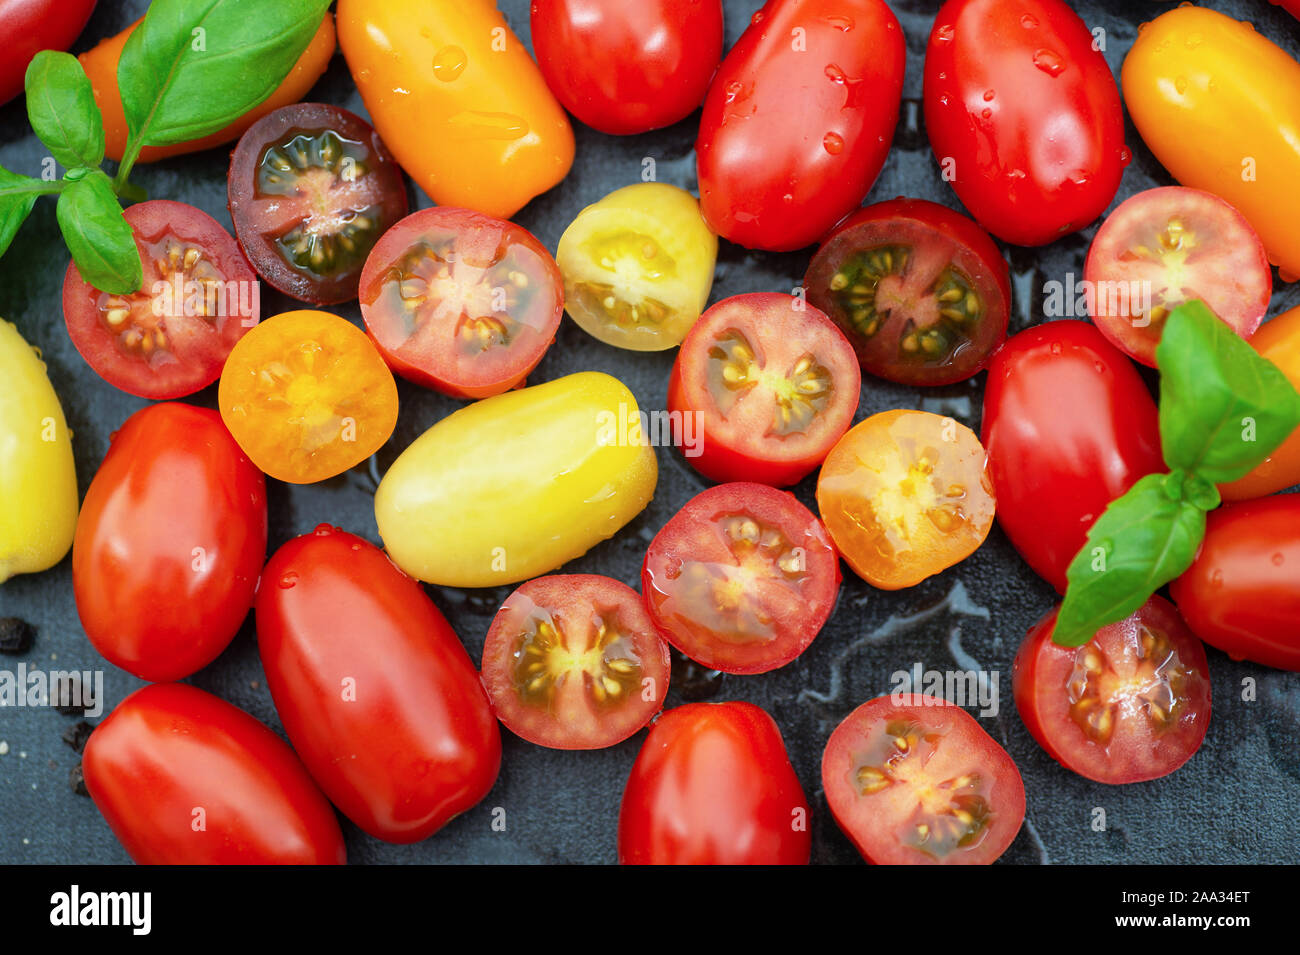 Mixed color tomatoes with olive oil Stock Photo